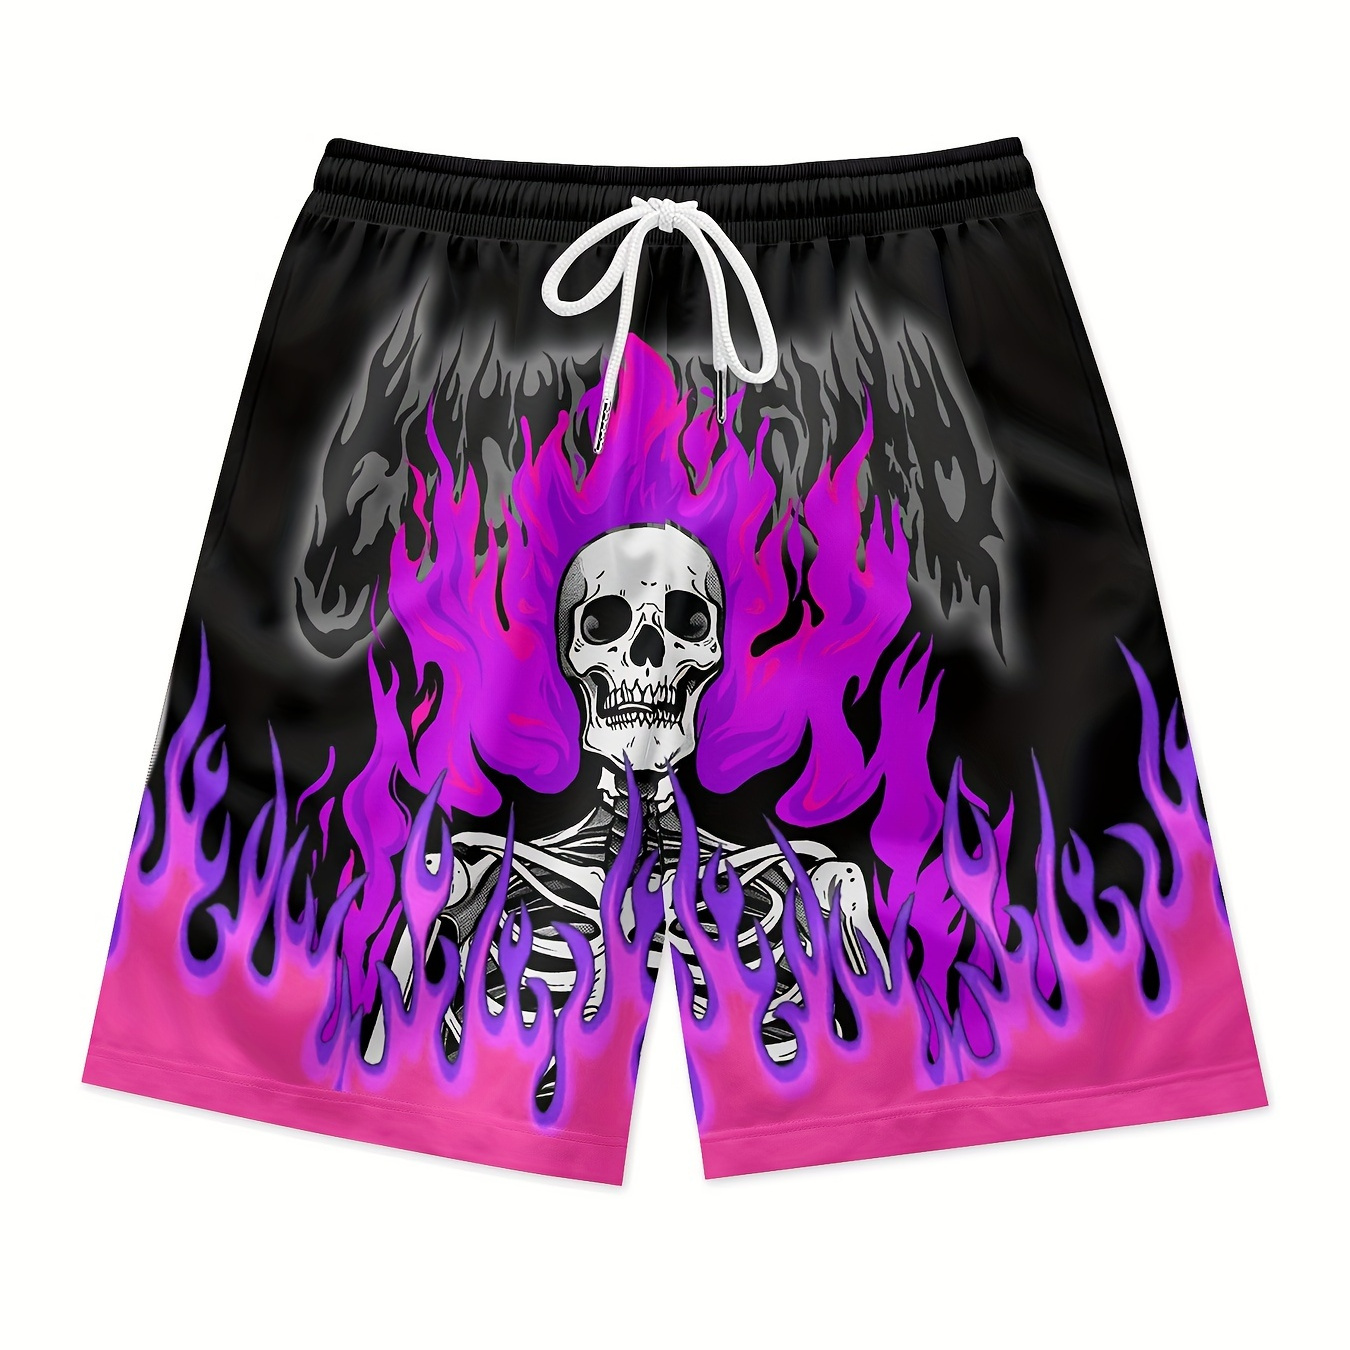 

Purple Flame Skeleton Man Print Men's Black Waist Shorts Quick Dry Breathable Polyester Shorts Daily Streetwear Vacation Shorts Clothing Bottoms